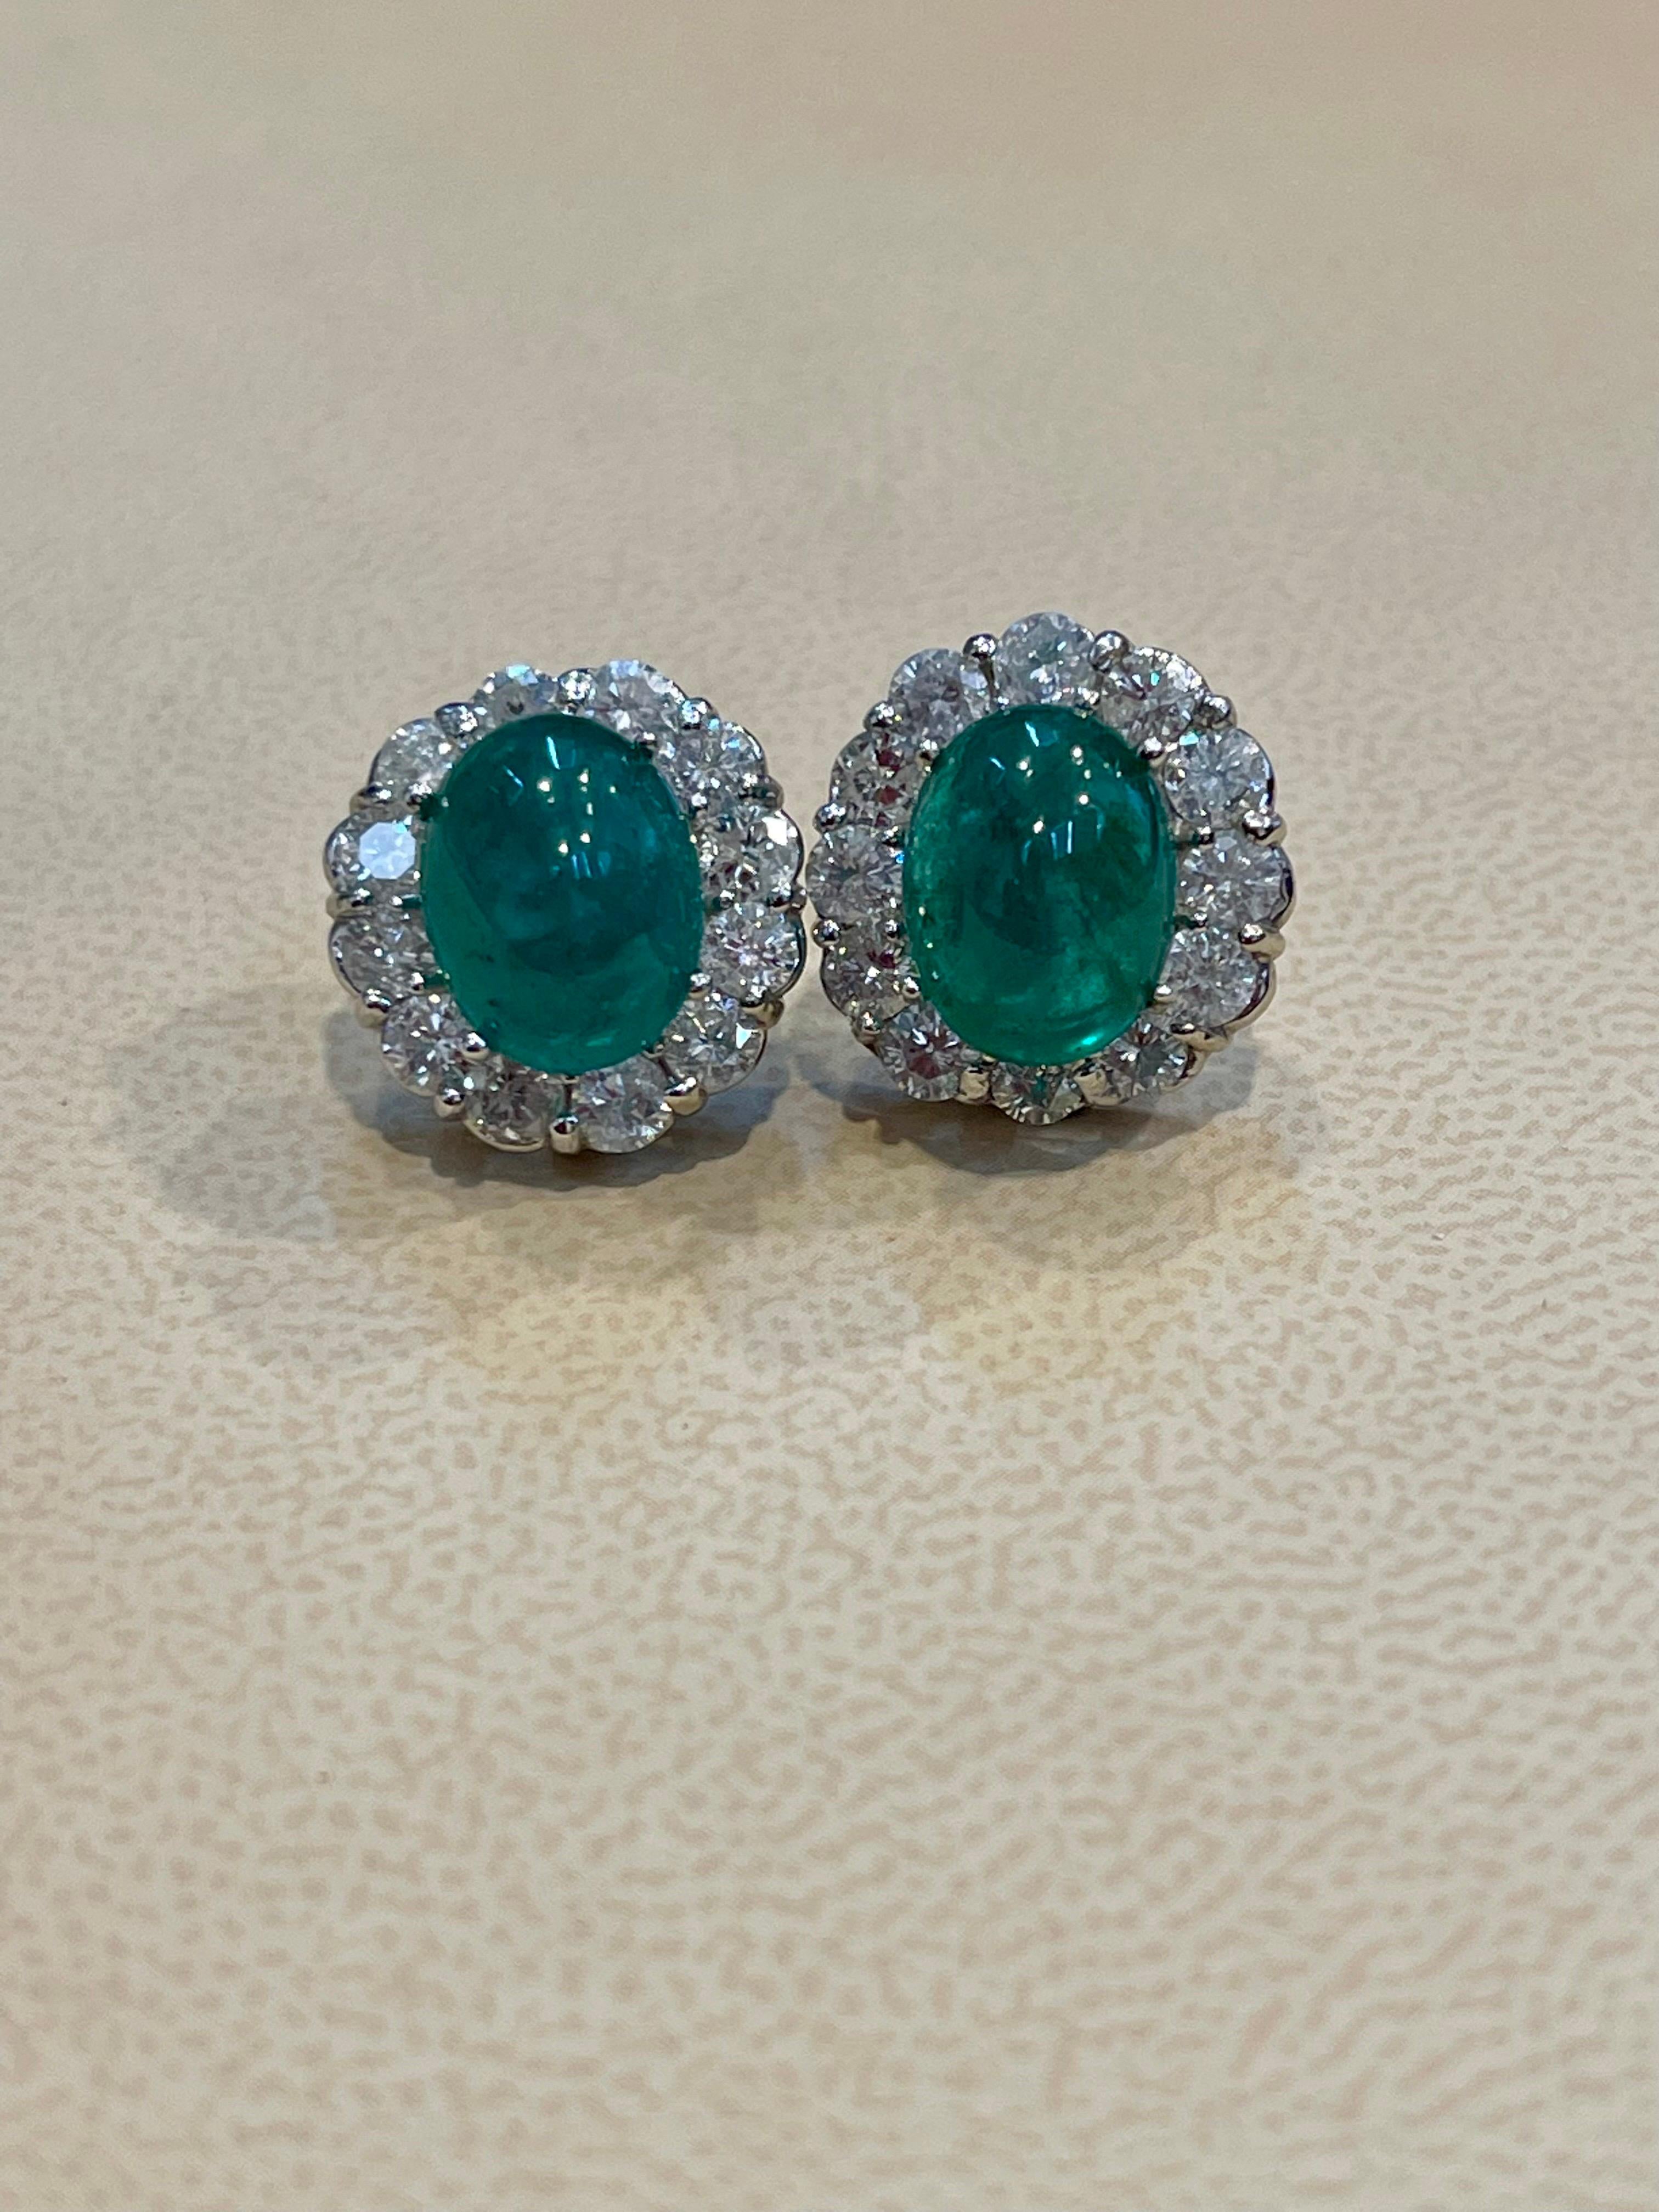 12 Ct Natural Emerald Zambia Cabochon & 4 Ct Diamond Stud Earring 14 KW Gold For Sale 5